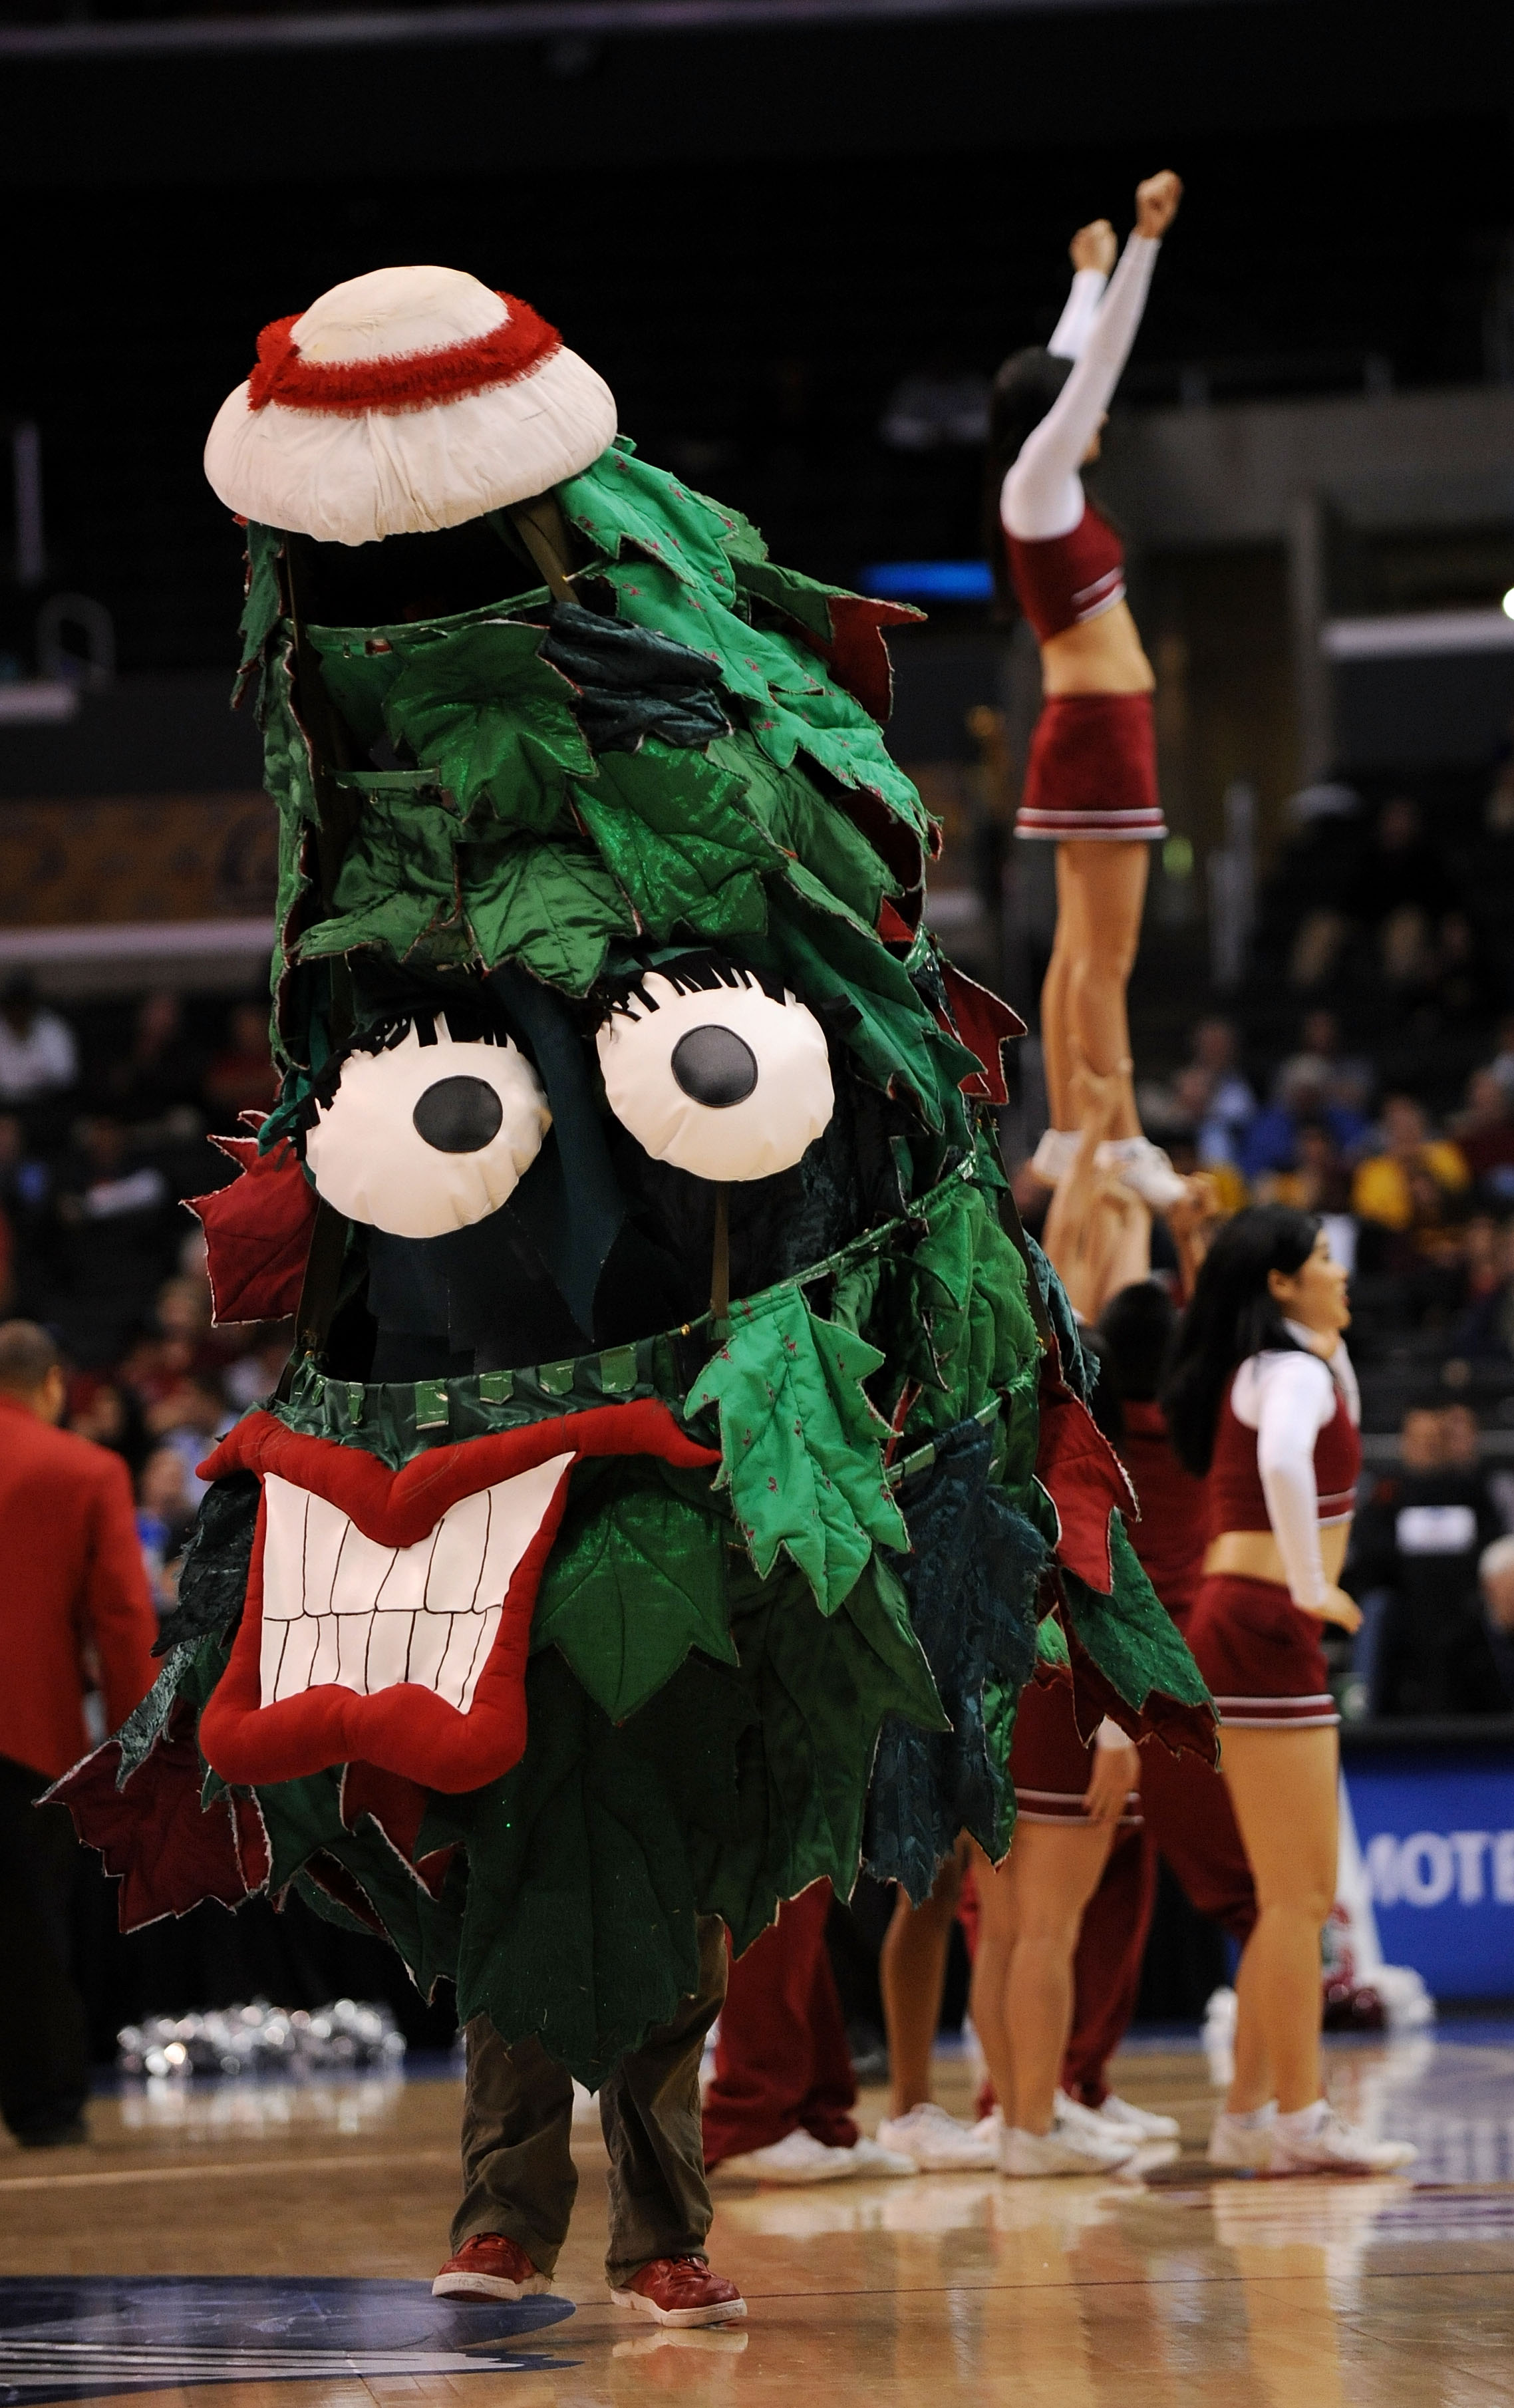 LOS ANGELES, CA - MARCH 12:  The Stanford Cardinal Tree performs on the court during the game against the Washington Huskies in the Pacific Life Pac-10 Men's Basketball Tournament at the Staples Center on March 12, 2009 in Los Angeles, California.  (Photo